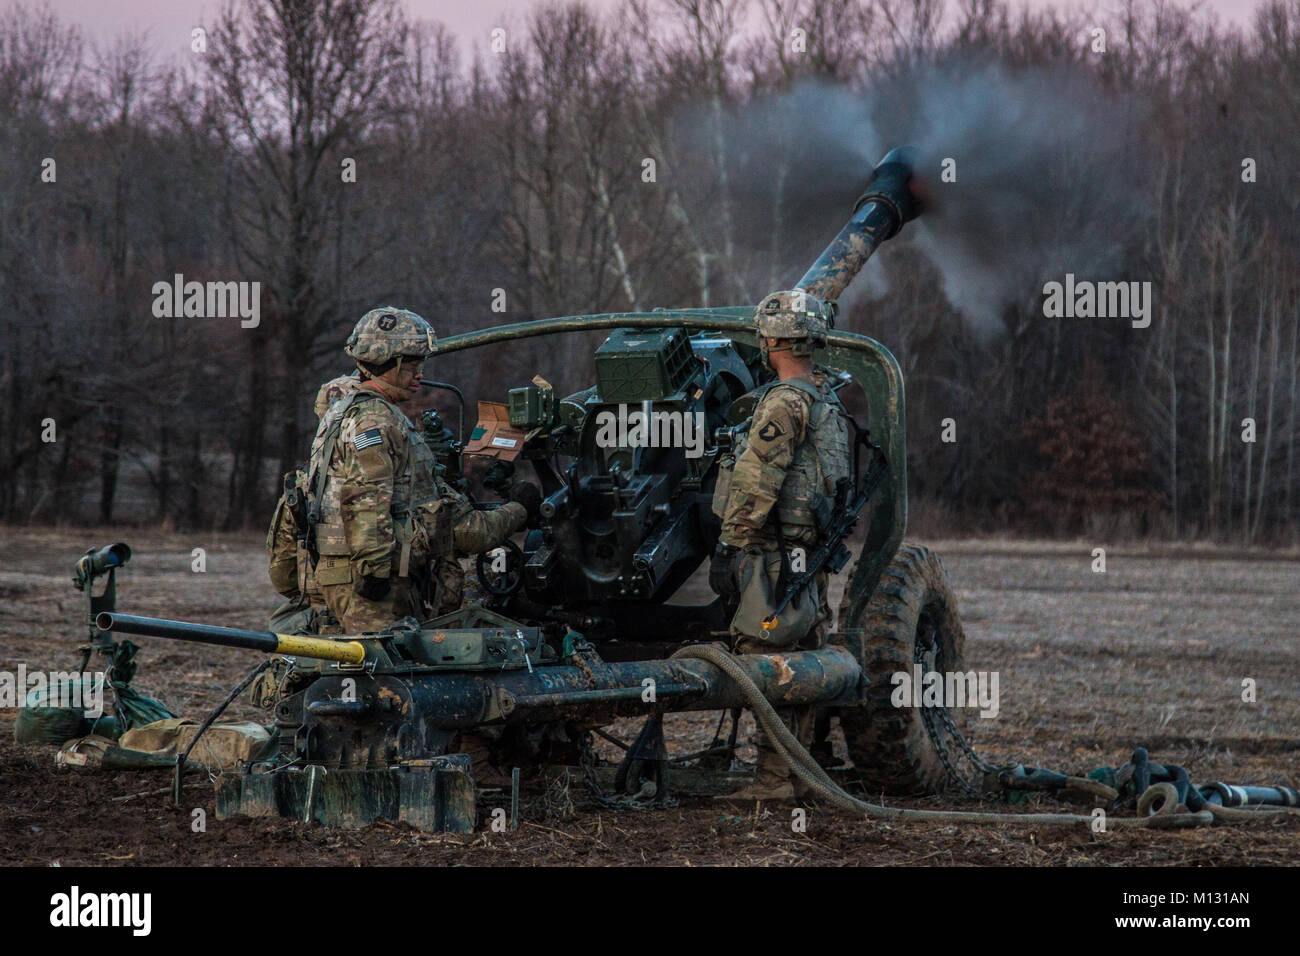 Artillerymen from B. Battery, 3-320th Field Artillery, 101st Airborne Division Division Artillery, 101st Airborne Division (Air Assault) fire the Howitzer M119A3 during platoon validation firing January 24 on Fort Campbell. The Howitzers were sling loaded into place from 3 UH-60 Black Hawks. Stock Photo